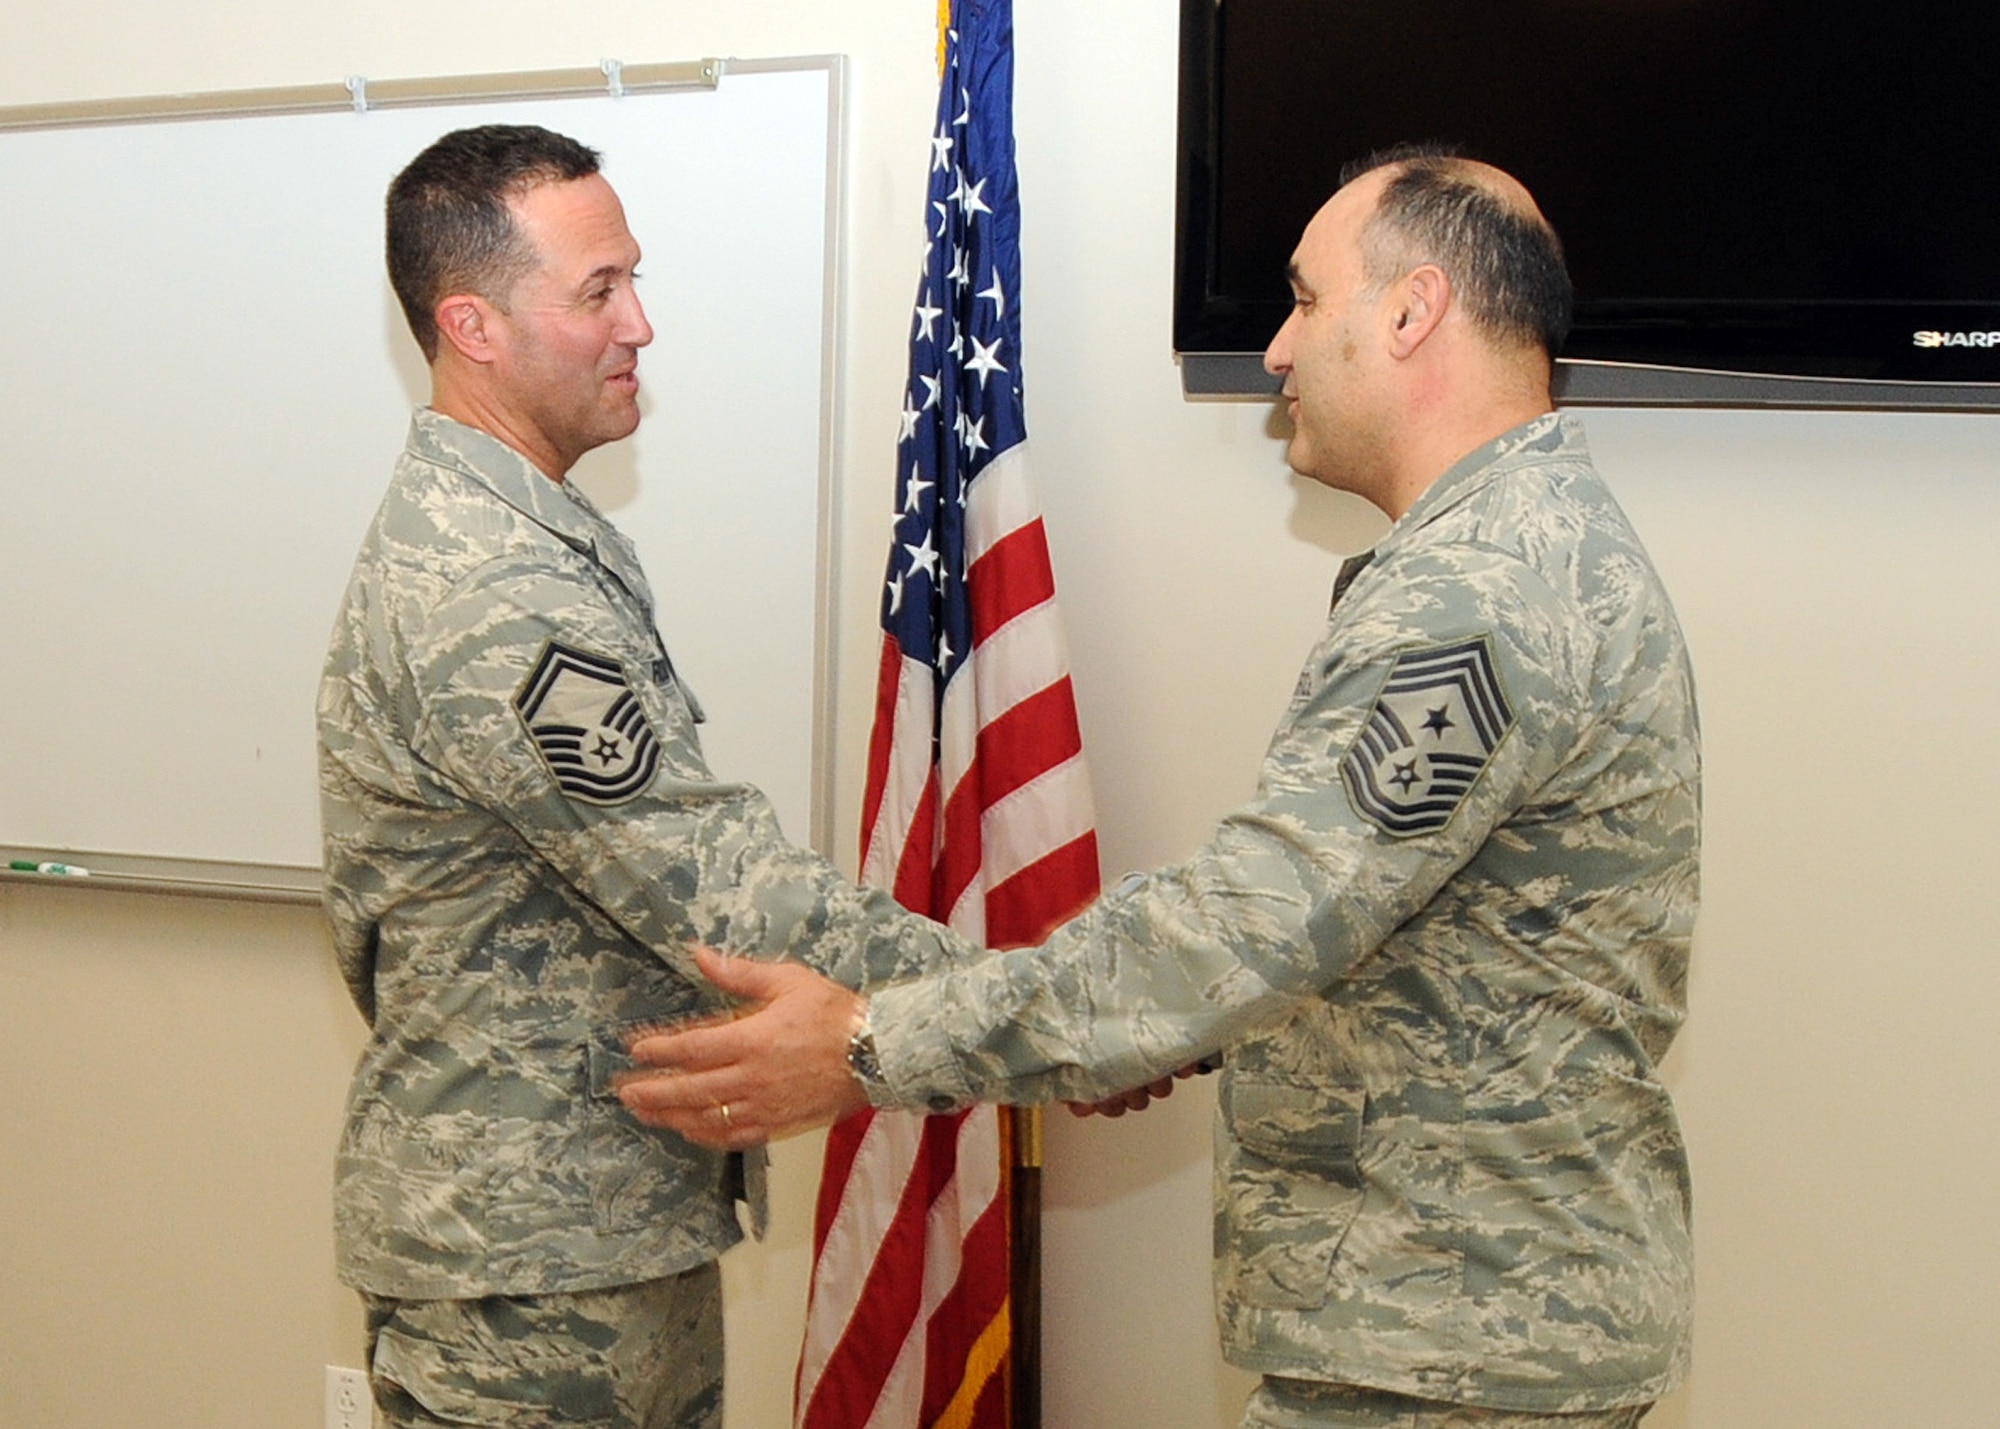 Command Chief Master Sergeant Jose Baltazar, Command Chief, 143d Airlift Wing, Rhode Island Air National Guard, presents Senior Master Sergeant Brian Robitaille, Fuels Management Flight Chief, 143d AW, with a challenge coin for his role in preparing for, executing and instructing at the inaugural Leadership Development Course held at Quonset Air National Guard Base, North Kingstown, Rhode Island on January 21, 2015. National Guard Photo by Master Sergeant Janeen Miller (RELEASED)